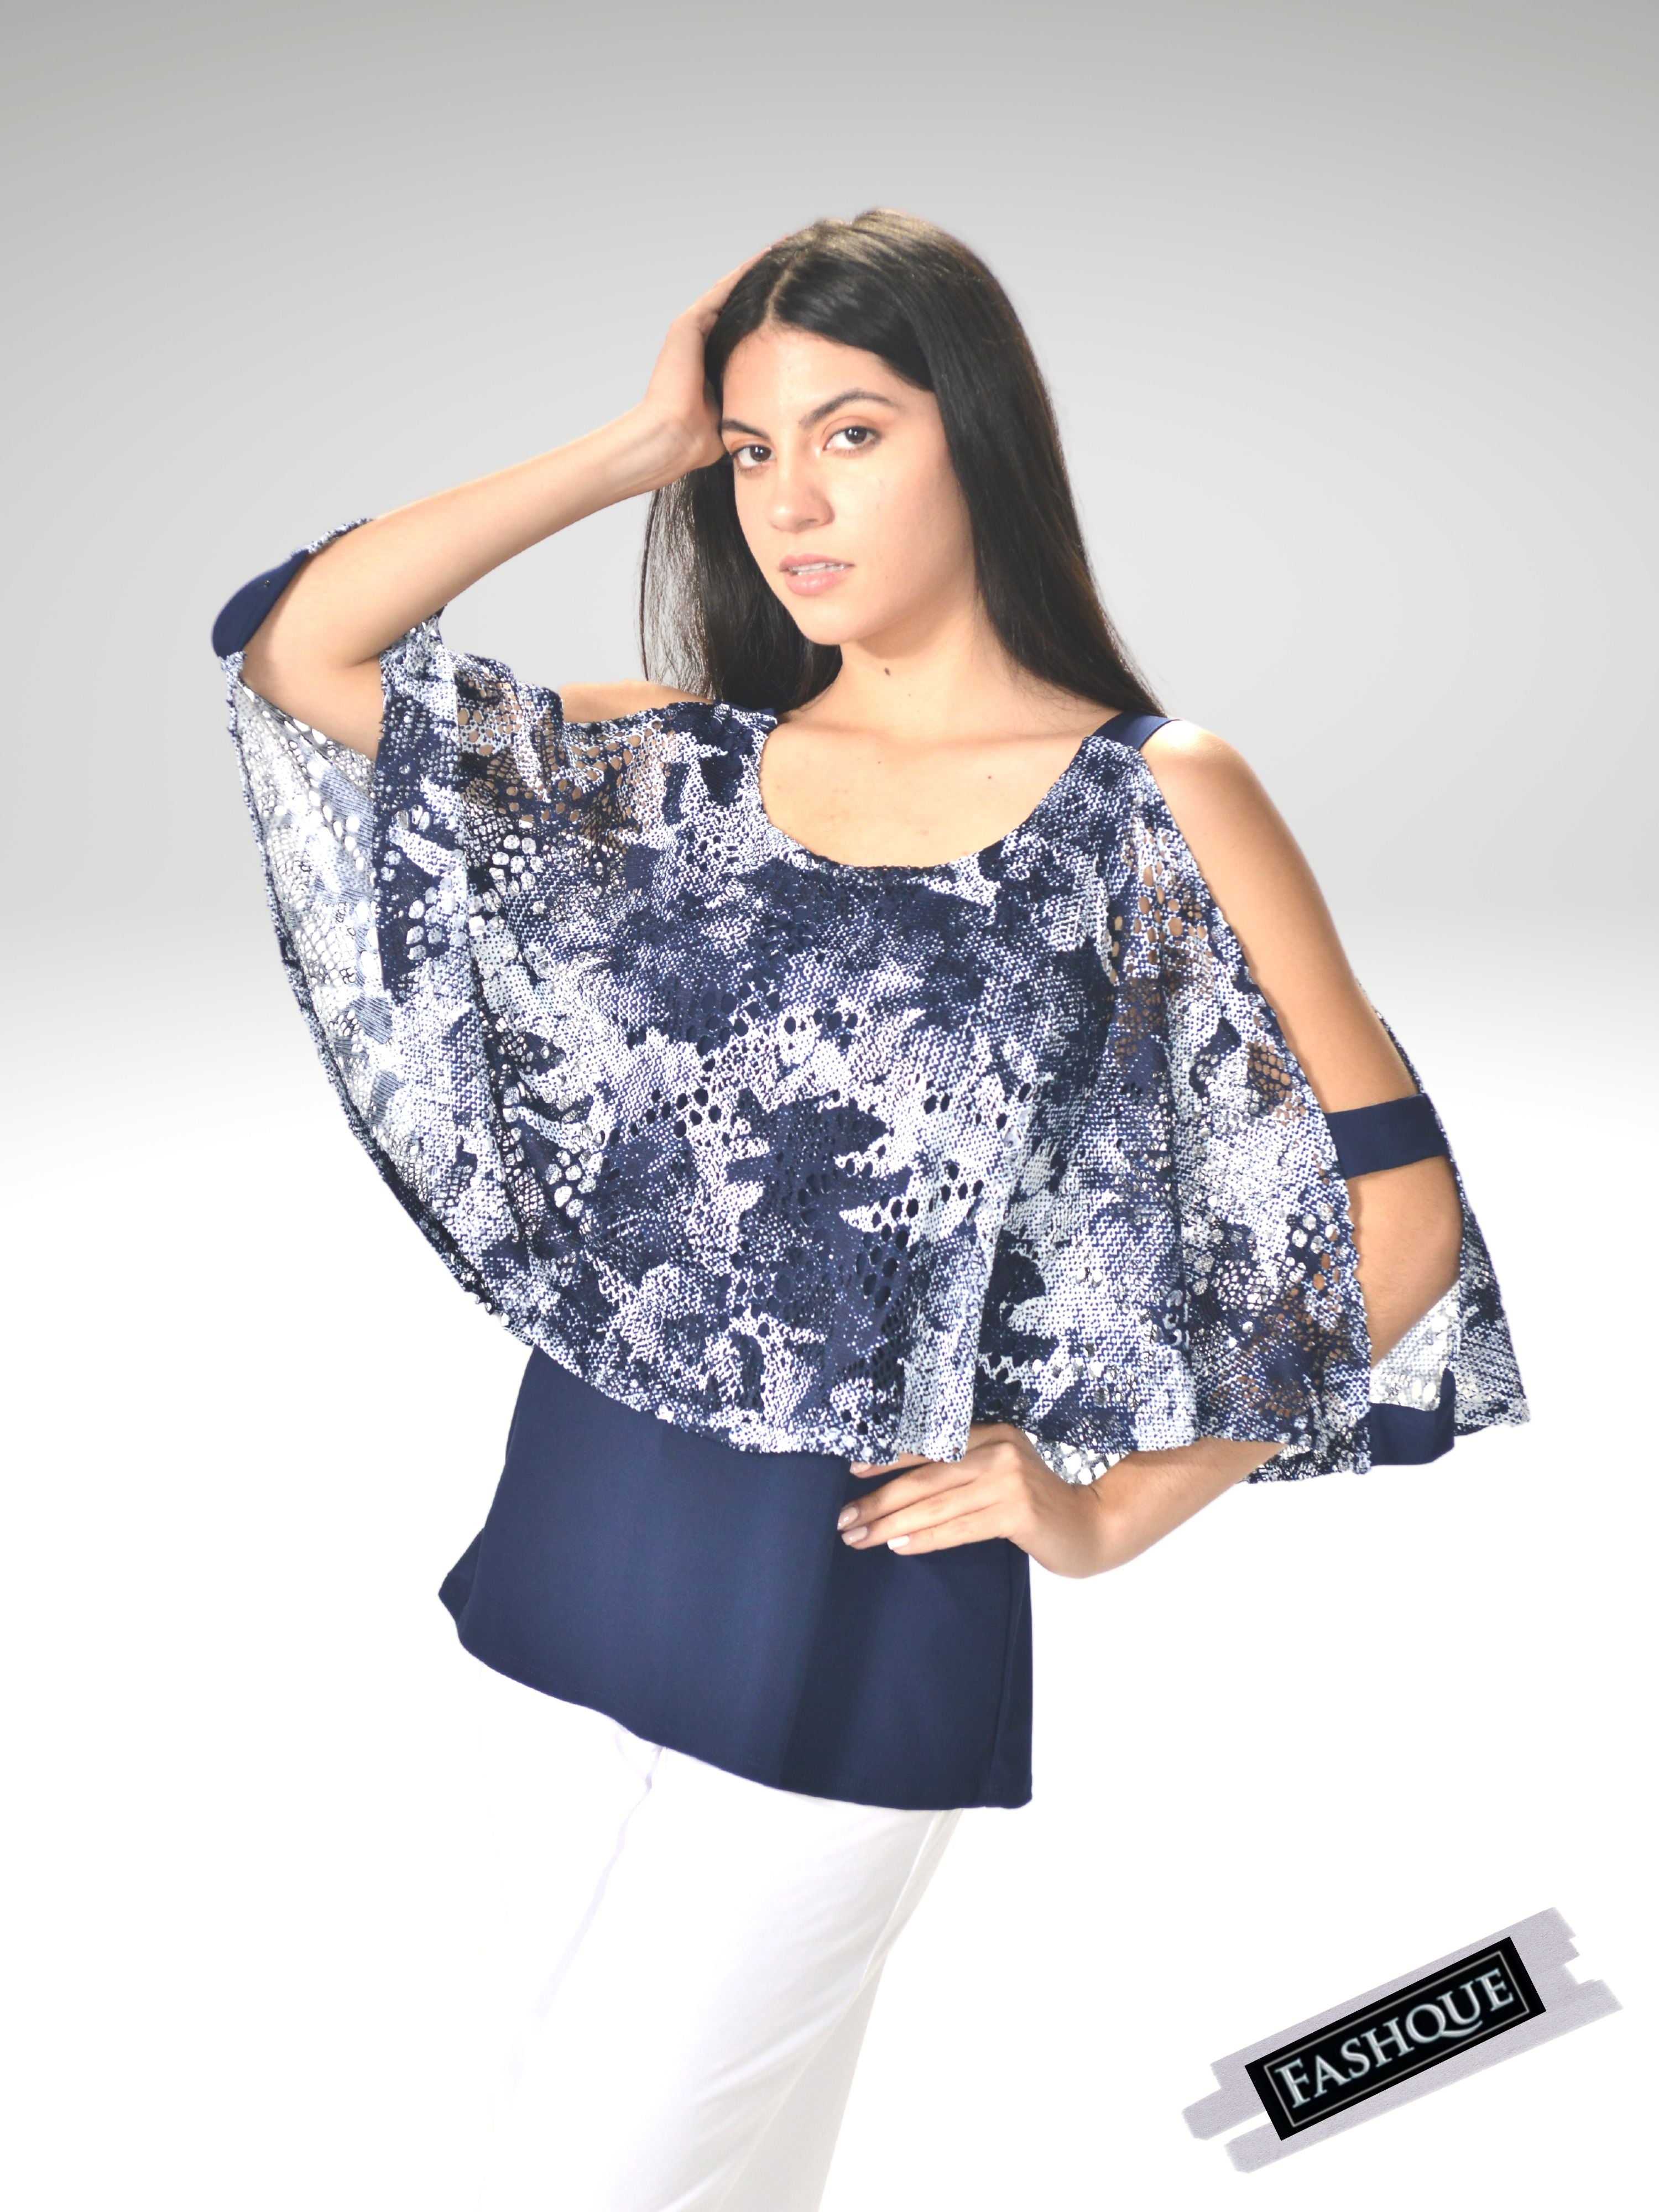 FASHQUE - Elegant Drape Top with Strappy Sleeve - T614